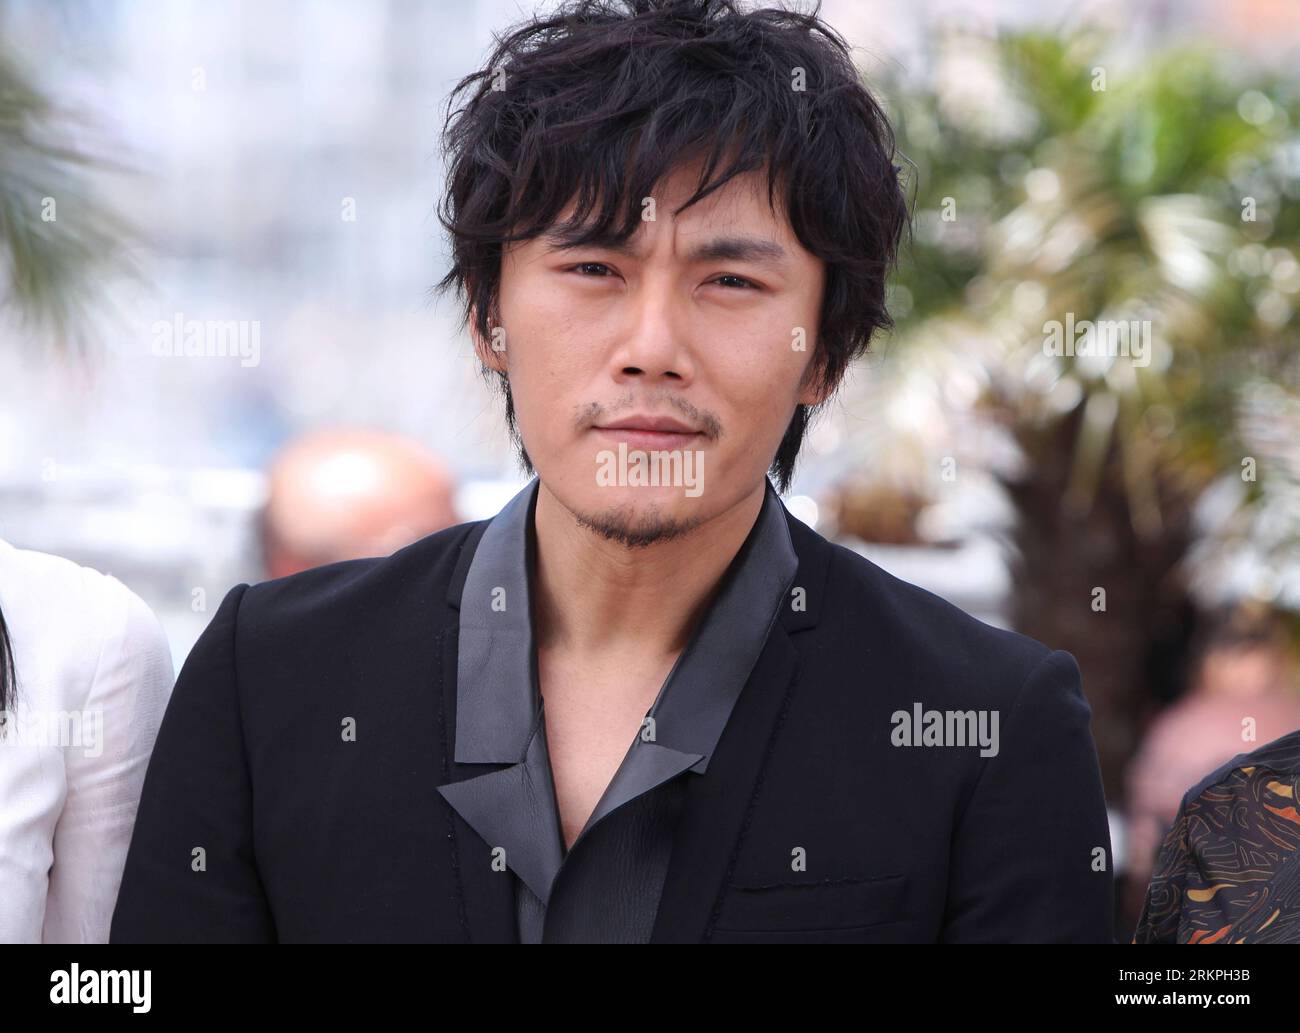 Bildnummer: 57998204  Datum: 17.05.2012  Copyright: imago/Xinhua (120517) -- CANNES, May 17, 2012 (Xinhua) -- Chinese actor Qin Hao poses for photos during a photocall for Chinese film MYSTERY , opening film for Un Certain Regard , at the 65th Cannes Film Festival, southern France, May 17, 2012. (Xinhua/Gao Jing) (zyw) FRANCE-CANNES-FILM FESTIVAL-PHOTOCALL-MYSTERY PUBLICATIONxNOTxINxCHN People Kultur Entertainment Film Filmfestival Festival 65 Cannes xjh x0x premiumd 2012 quer      57998204 Date 17 05 2012 Copyright Imago XINHUA  Cannes May 17 2012 XINHUA Chinese Actor Qin Hao Poses for Photos Stock Photo